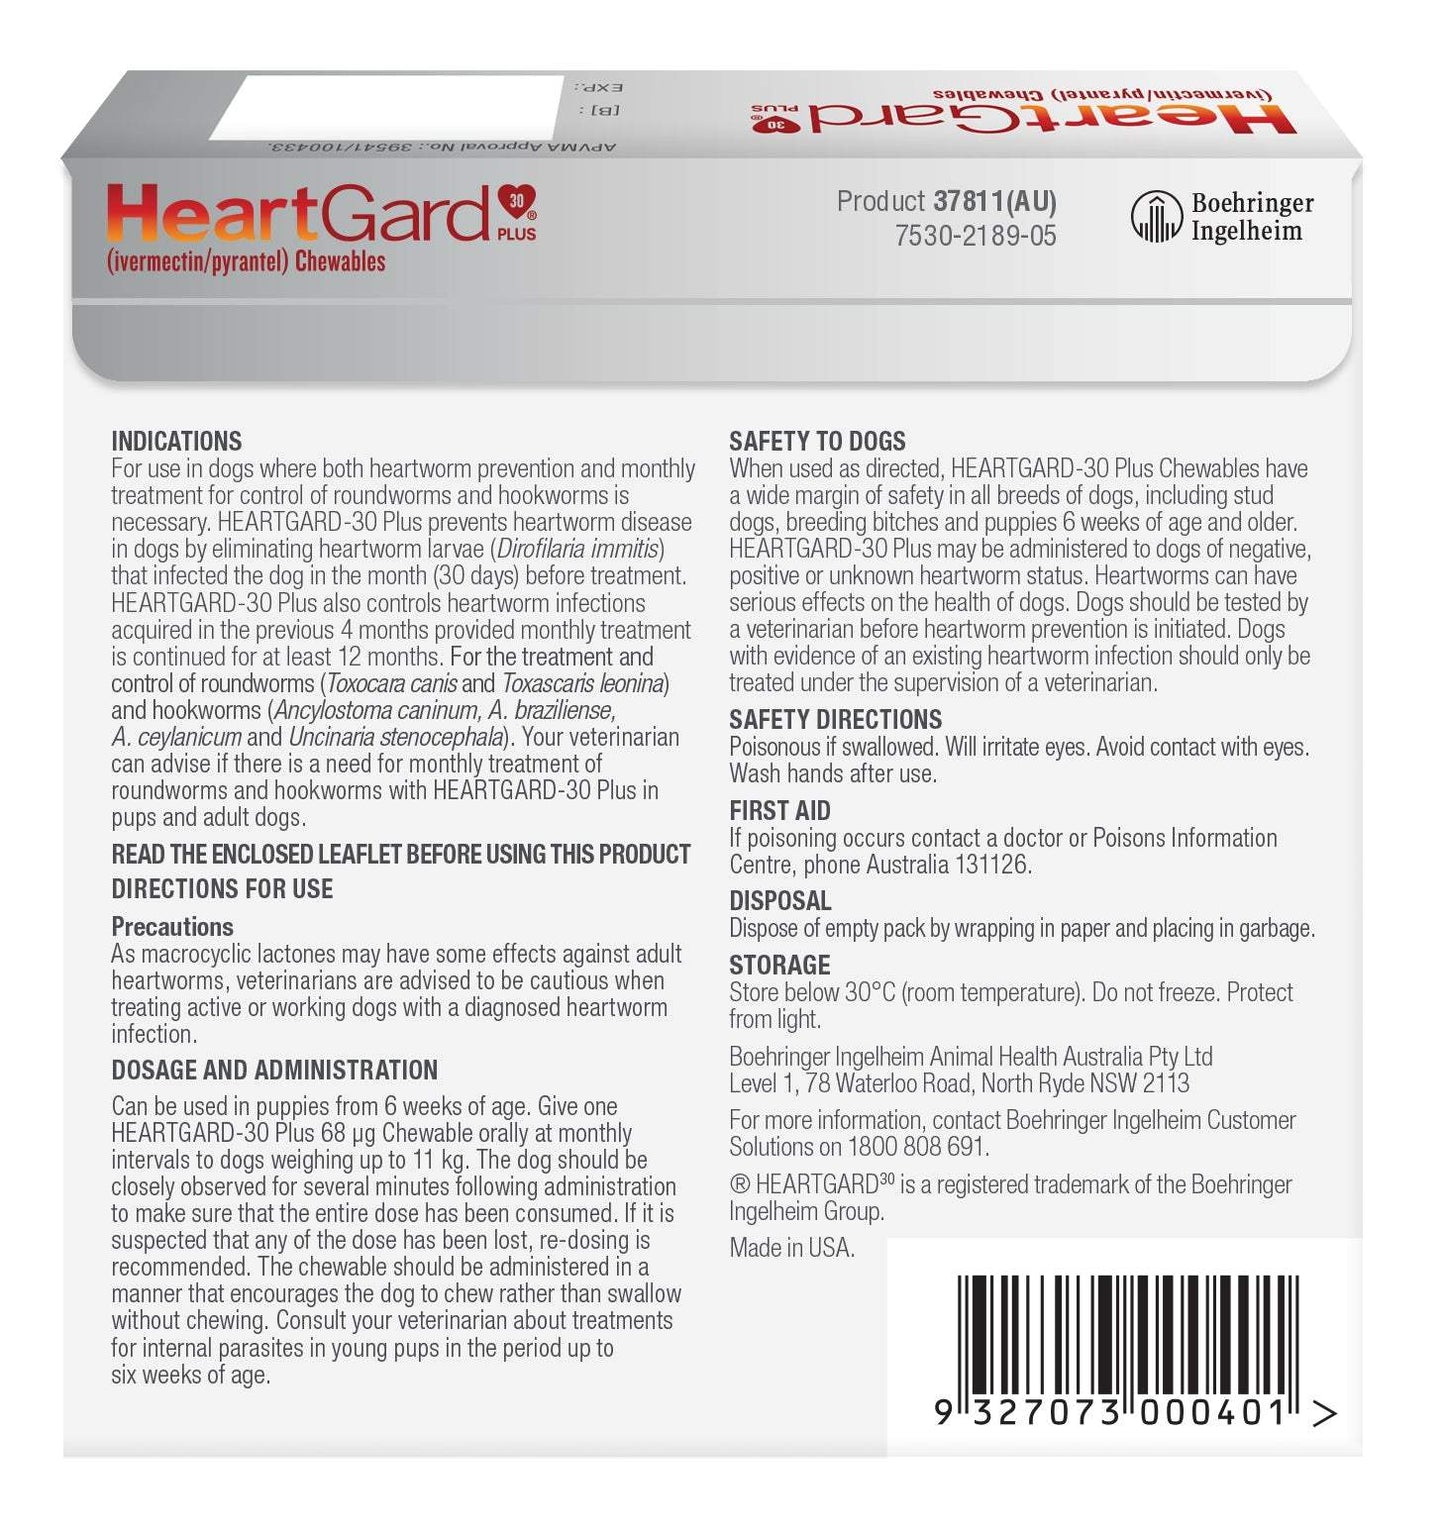 Heartgard Plus Chew for Dogs, up to 25 lbs, (Blue)